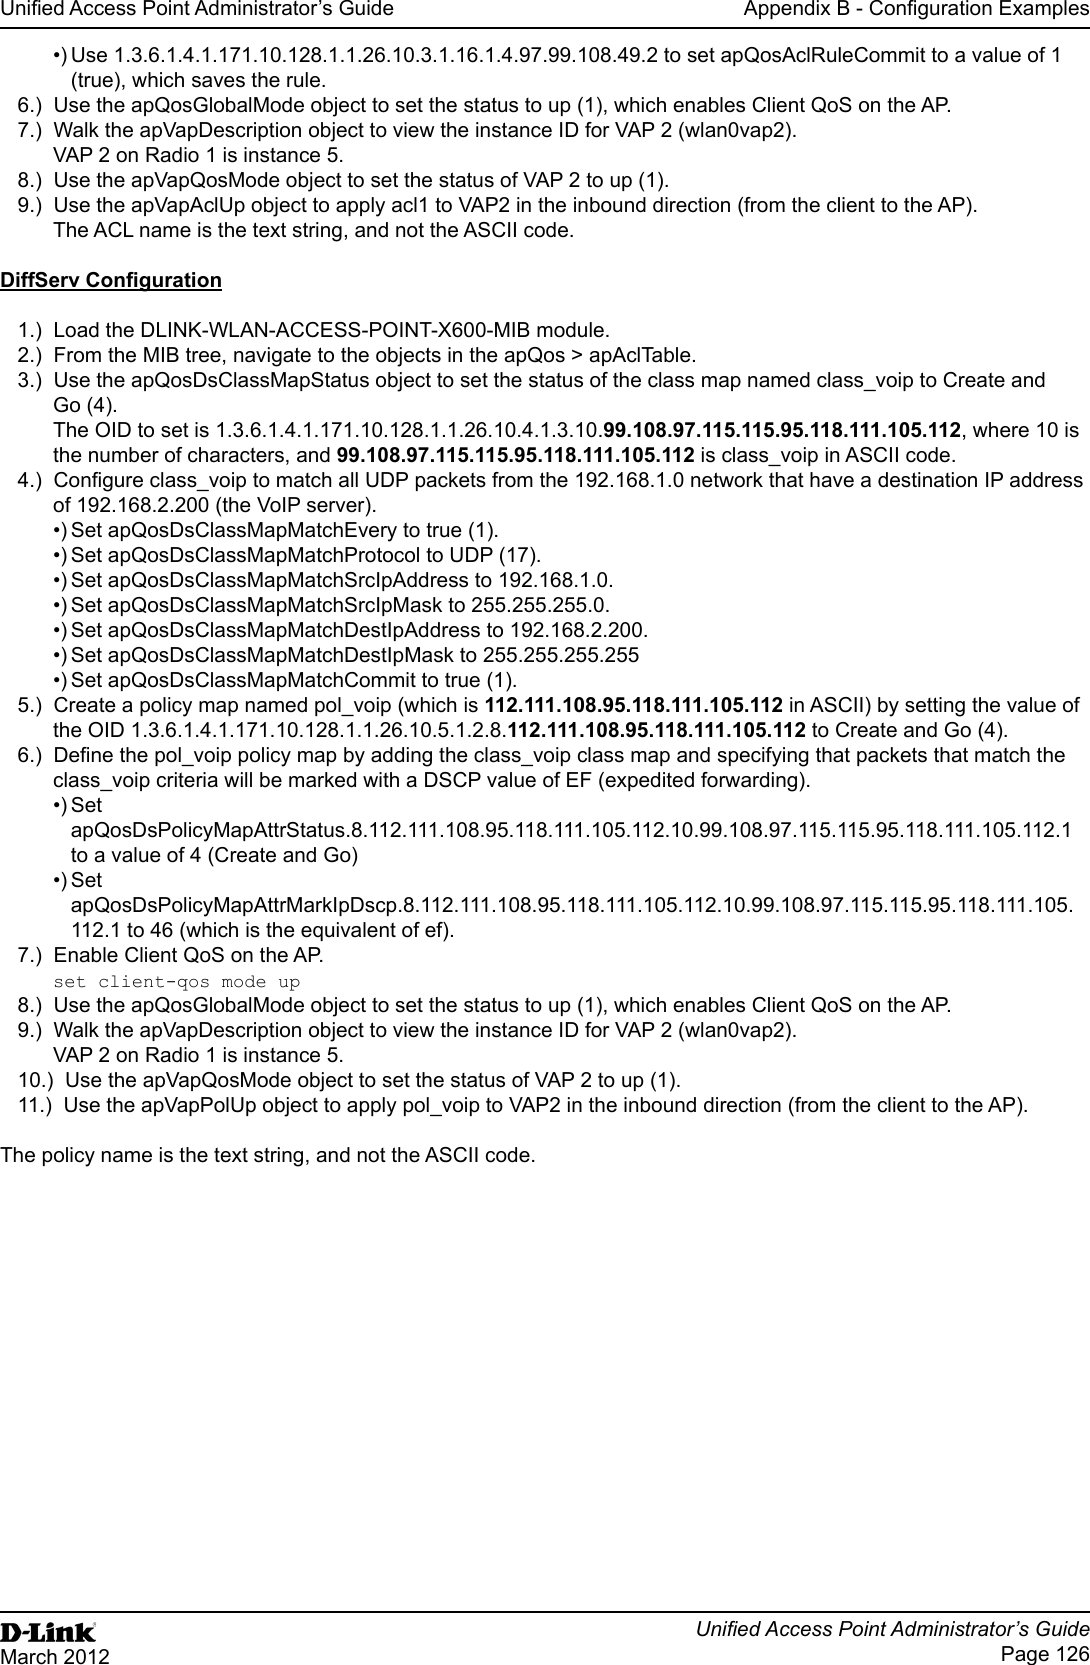 Unied Access Point Administrator’s GuideUnied Access Point Administrator’s GuidePage 126March 2012Appendix B - Conguration Examples•) Use 1.3.6.1.4.1.171.10.128.1.1.26.10.3.1.16.1.4.97.99.108.49.2 to set apQosAclRuleCommit to a value of 1 (true), which saves the rule.6.)  Use the apQosGlobalMode object to set the status to up (1), which enables Client QoS on the AP.7.)  Walk the apVapDescription object to view the instance ID for VAP 2 (wlan0vap2).VAP 2 on Radio 1 is instance 5.8.)  Use the apVapQosMode object to set the status of VAP 2 to up (1).9.)  Use the apVapAclUp object to apply acl1 to VAP2 in the inbound direction (from the client to the AP). The ACL name is the text string, and not the ASCII code.DiffServ Conguration1.)  Load the DLINK-WLAN-ACCESS-POINT-X600-MIB module.2.)  From the MIB tree, navigate to the objects in the apQos &gt; apAclTable.3.)  Use the apQosDsClassMapStatus object to set the status of the class map named class_voip to Create and Go (4).The OID to set is 1.3.6.1.4.1.171.10.128.1.1.26.10.4.1.3.10.99.108.97.115.115.95.118.111.105.112, where 10 is the number of characters, and 99.108.97.115.115.95.118.111.105.112 is class_voip in ASCII code.4.)  Congure class_voip to match all UDP packets from the 192.168.1.0 network that have a destination IP address of 192.168.2.200 (the VoIP server). •) Set apQosDsClassMapMatchEvery to true (1).•) Set apQosDsClassMapMatchProtocol to UDP (17).•) Set apQosDsClassMapMatchSrcIpAddress to 192.168.1.0.•) Set apQosDsClassMapMatchSrcIpMask to 255.255.255.0.•) Set apQosDsClassMapMatchDestIpAddress to 192.168.2.200.•) Set apQosDsClassMapMatchDestIpMask to 255.255.255.255•) Set apQosDsClassMapMatchCommit to true (1).5.)  Create a policy map named pol_voip (which is 112.111.108.95.118.111.105.112 in ASCII) by setting the value of the OID 1.3.6.1.4.1.171.10.128.1.1.26.10.5.1.2.8.112.111.108.95.118.111.105.112 to Create and Go (4).6.)  Dene the pol_voip policy map by adding the class_voip class map and specifying that packets that match the class_voip criteria will be marked with a DSCP value of EF (expedited forwarding).•) Set apQosDsPolicyMapAttrStatus.8.112.111.108.95.118.111.105.112.10.99.108.97.115.115.95.118.111.105.112.1 to a value of 4 (Create and Go)•) Set apQosDsPolicyMapAttrMarkIpDscp.8.112.111.108.95.118.111.105.112.10.99.108.97.115.115.95.118.111.105. 112.1 to 46 (which is the equivalent of ef).7.)  Enable Client QoS on the AP.set client-qos mode up8.)  Use the apQosGlobalMode object to set the status to up (1), which enables Client QoS on the AP.9.)  Walk the apVapDescription object to view the instance ID for VAP 2 (wlan0vap2).VAP 2 on Radio 1 is instance 5.10.)  Use the apVapQosMode object to set the status of VAP 2 to up (1).11.)  Use the apVapPolUp object to apply pol_voip to VAP2 in the inbound direction (from the client to the AP). The policy name is the text string, and not the ASCII code.